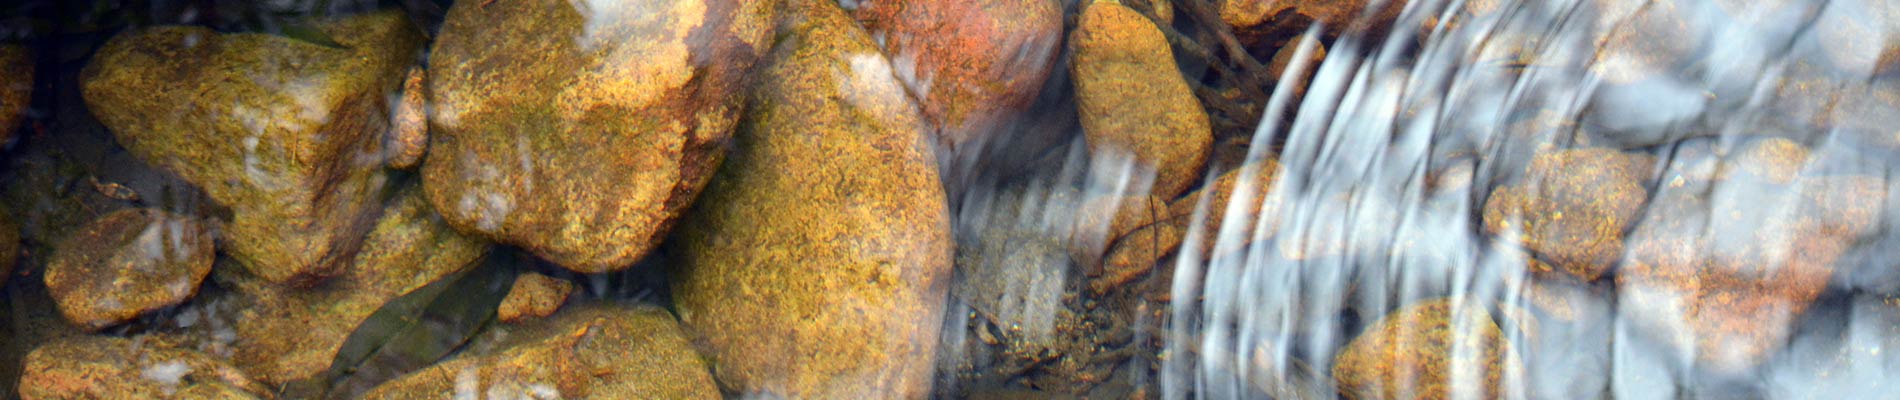 Rocks viewed through shallow water with a light reflection